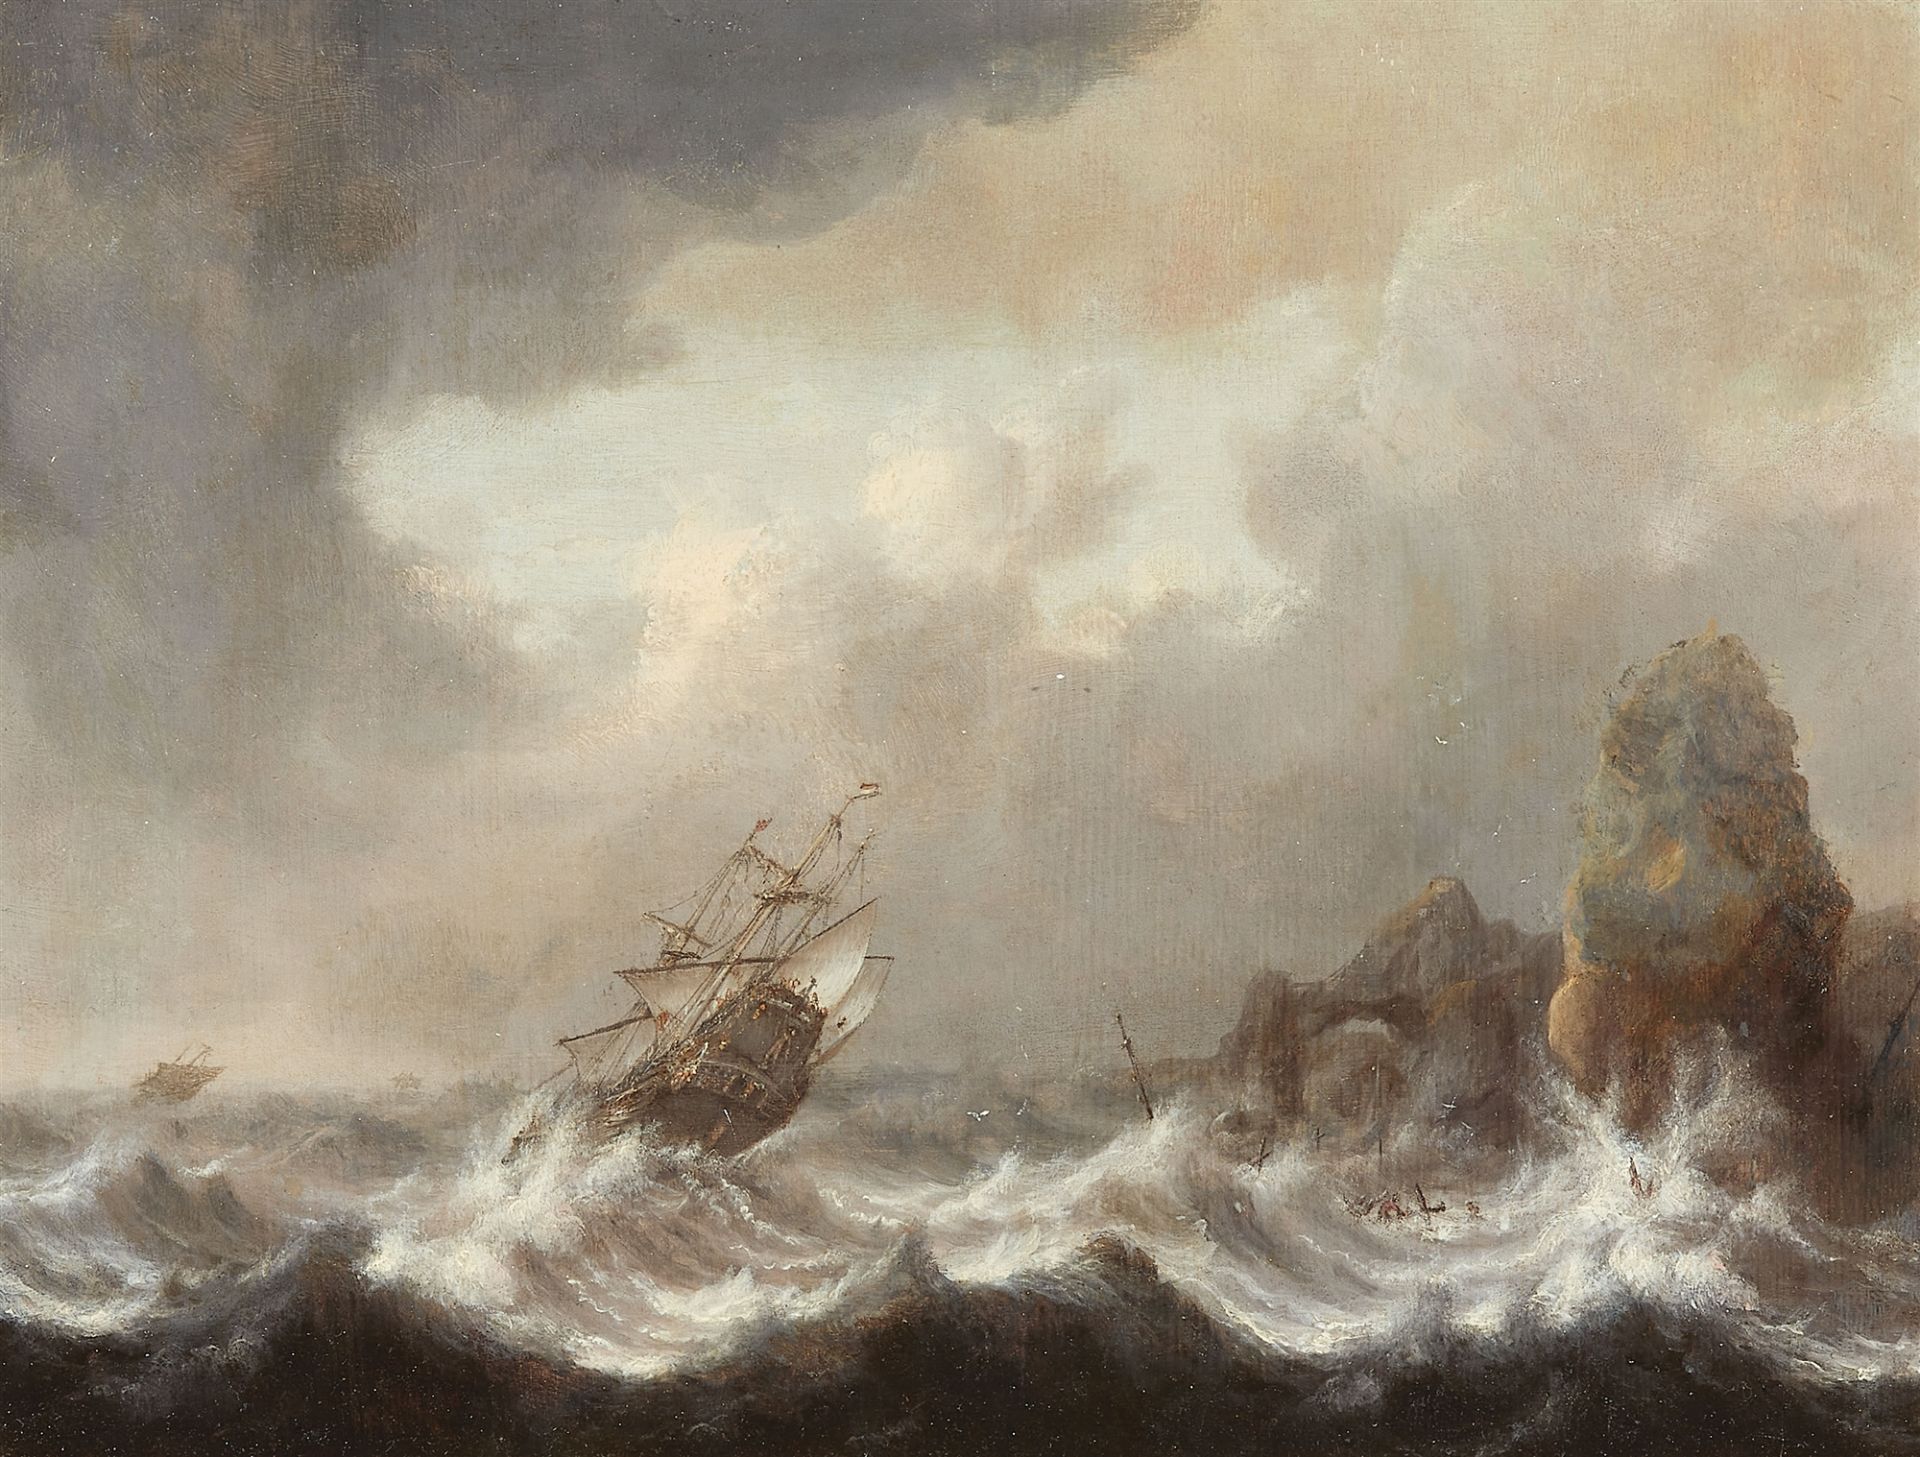 Hendrick Staets, attributed to, Ships Wrecked on a Rocky Coast